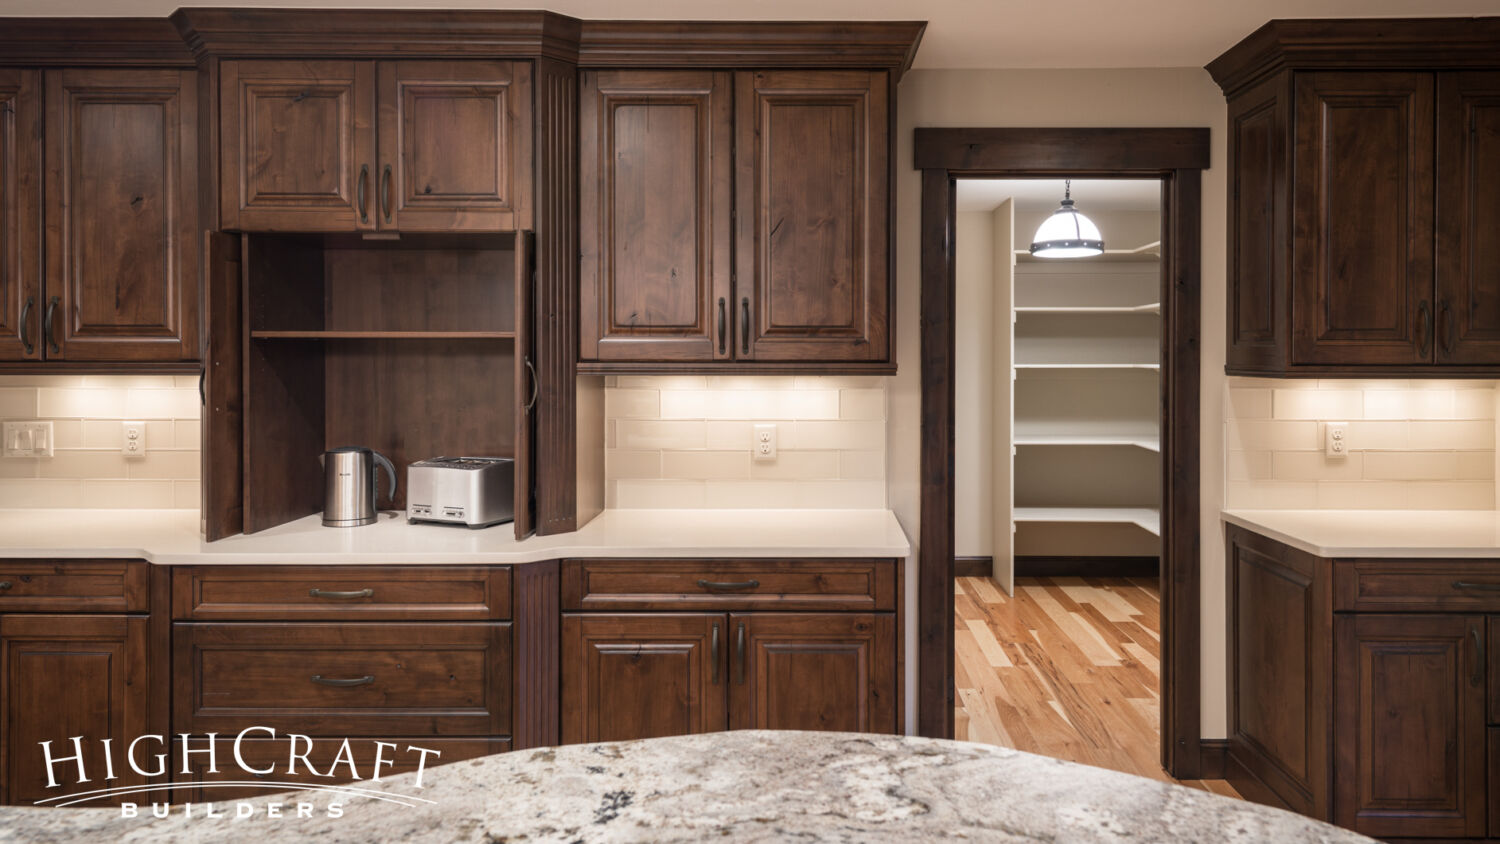 Earth-Tones-Remodel-Appliance-Storage-Pantry